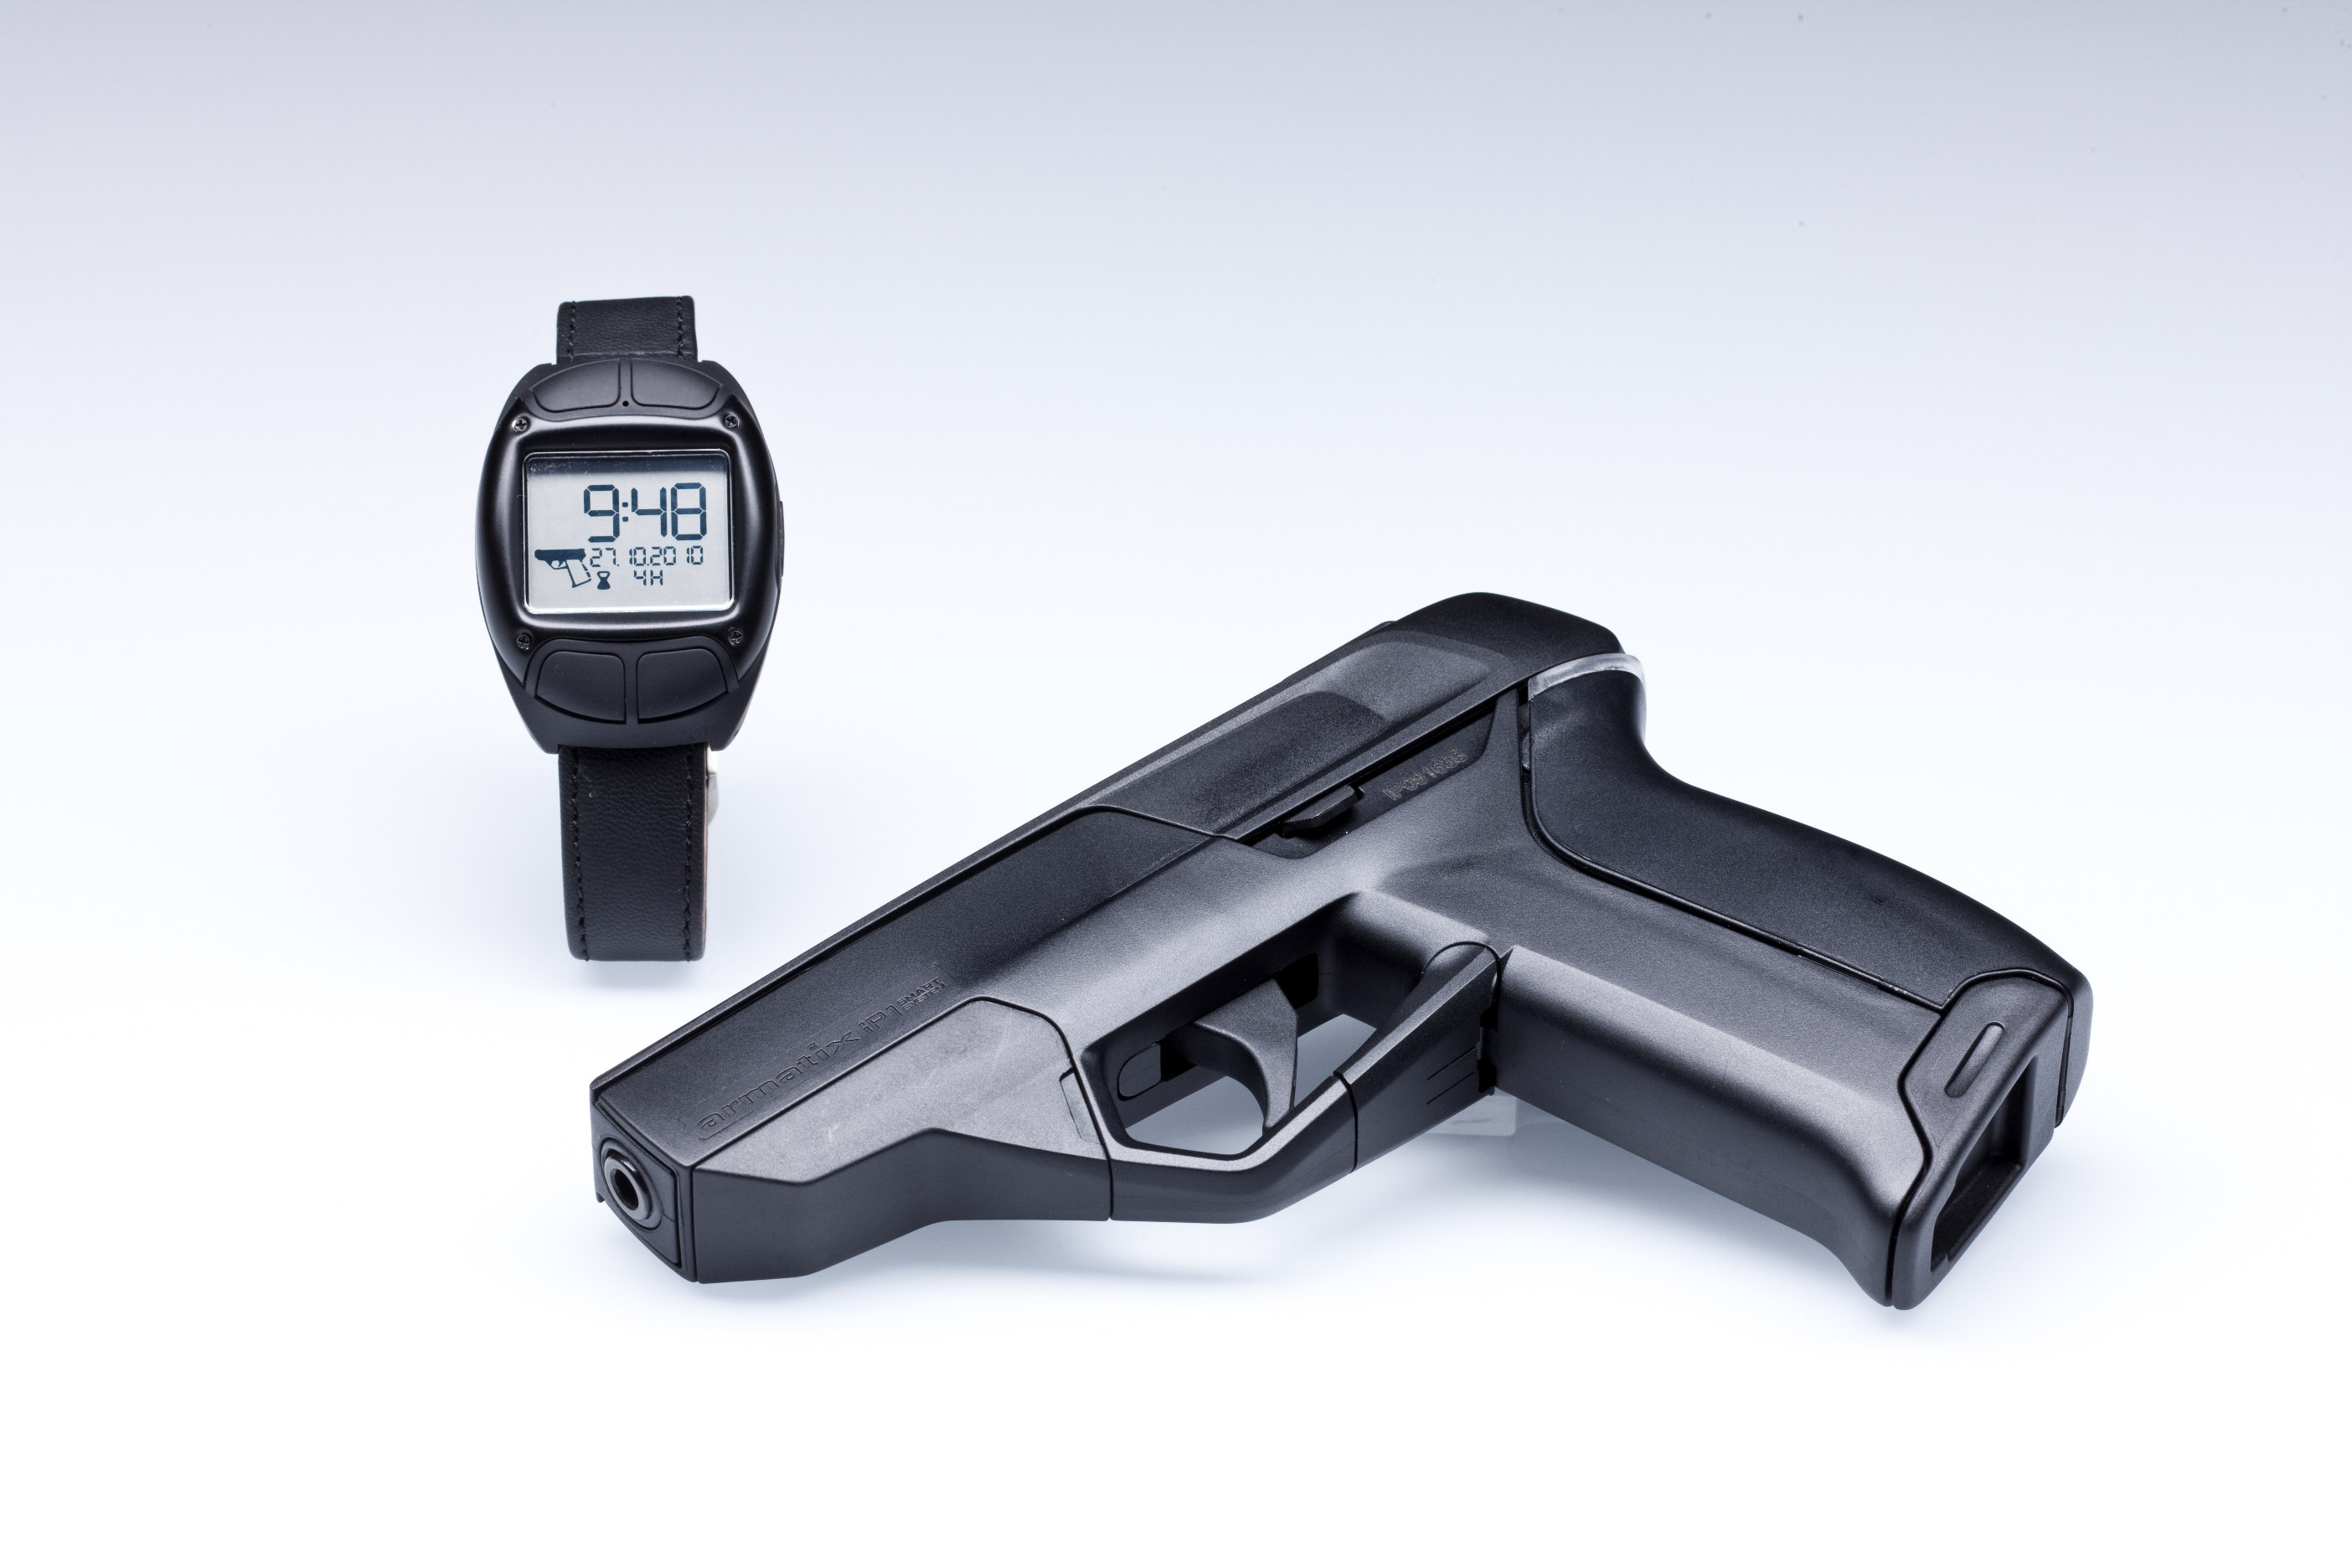 The iP1 smart gun with its radio frequency identification watch (courtesy of Armatix)